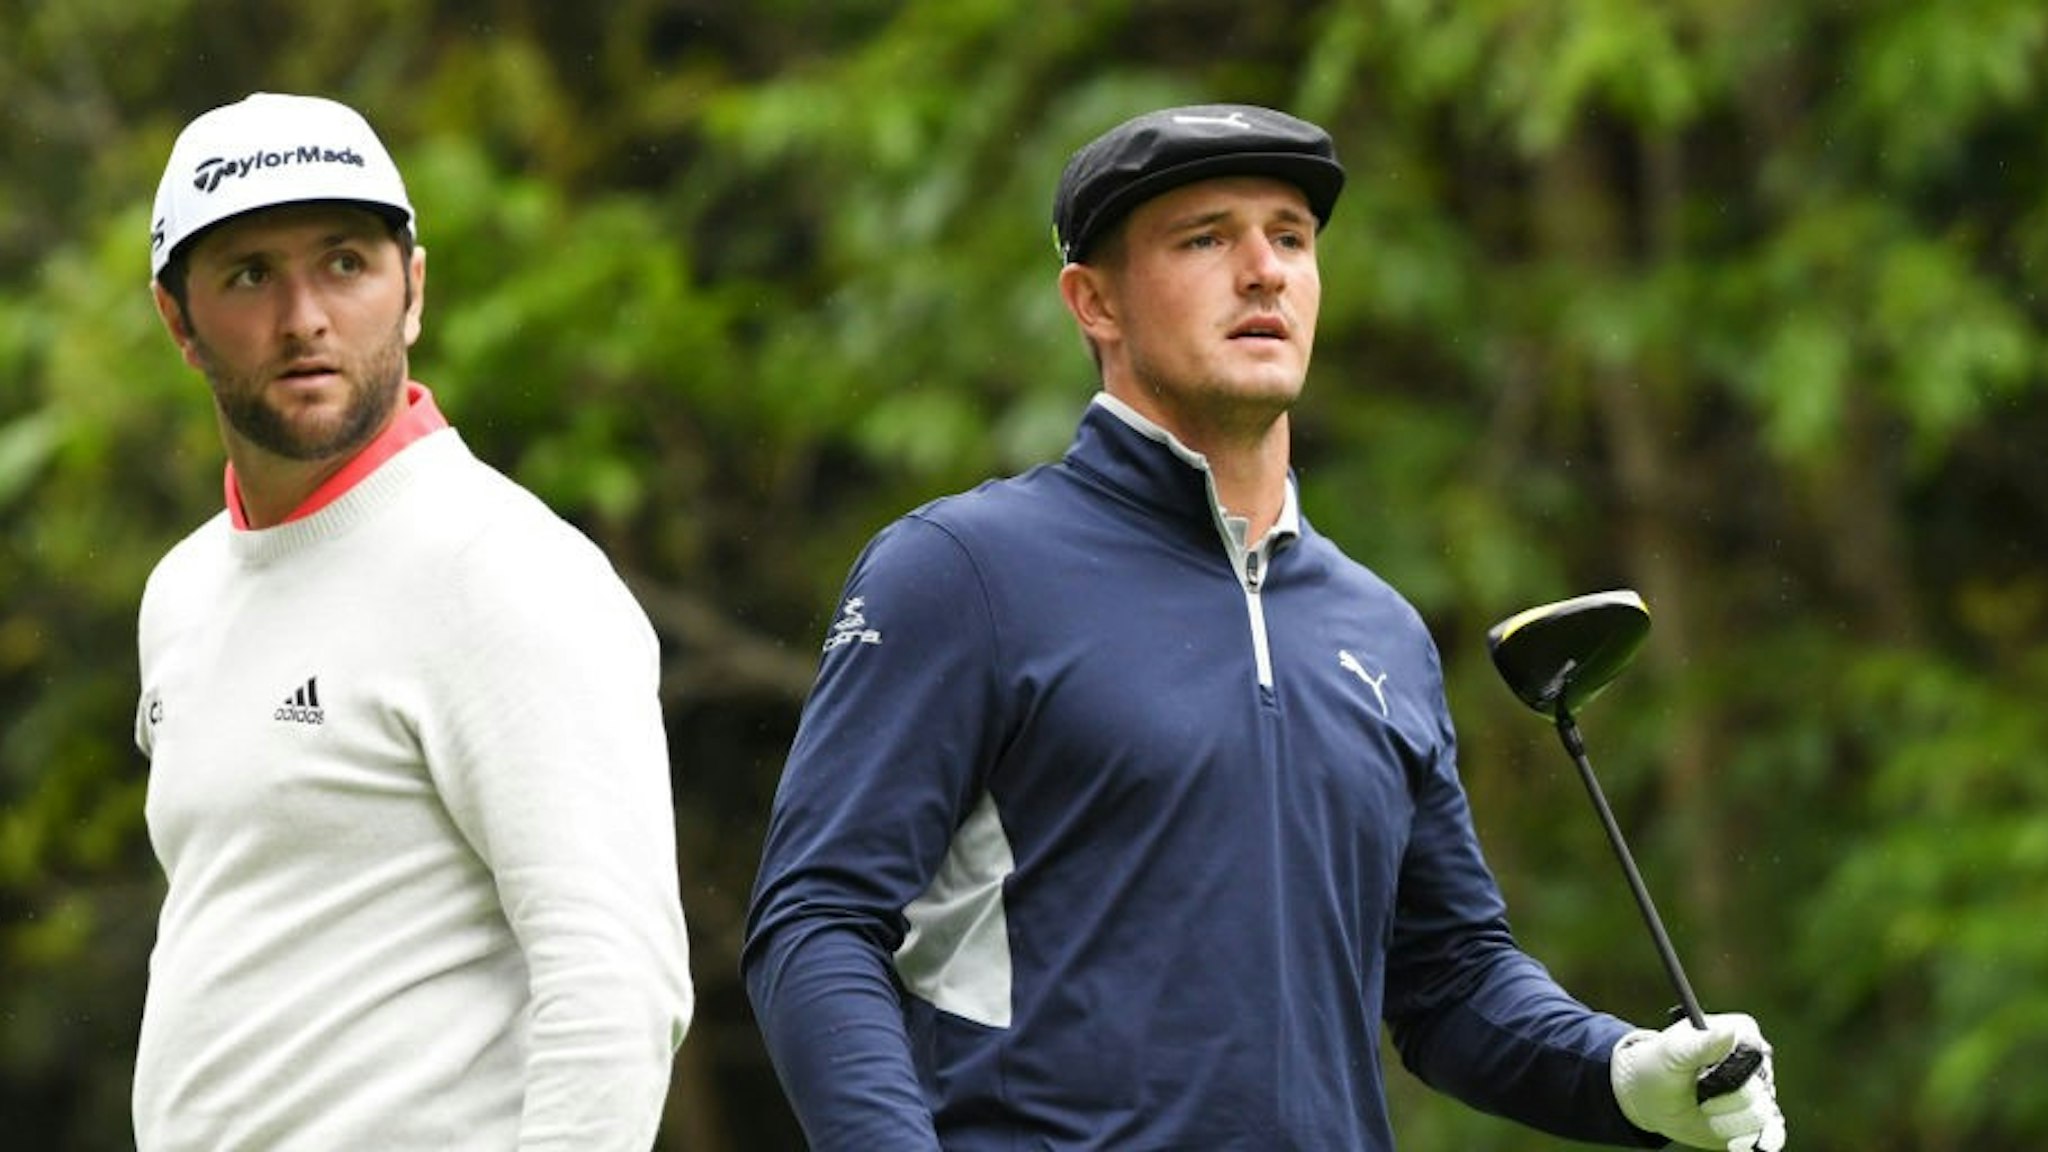 PACIFIC PALISADES, CALIFORNIA - FEBRUARY 15: Jon Rahm of Spain (L) and Bryson DeChambeau watch a tee shot on the 12th hole during the second round of the Genesis Open at Riviera Country Club on February 15, 2019 in Pacific Palisades, California. (Photo by